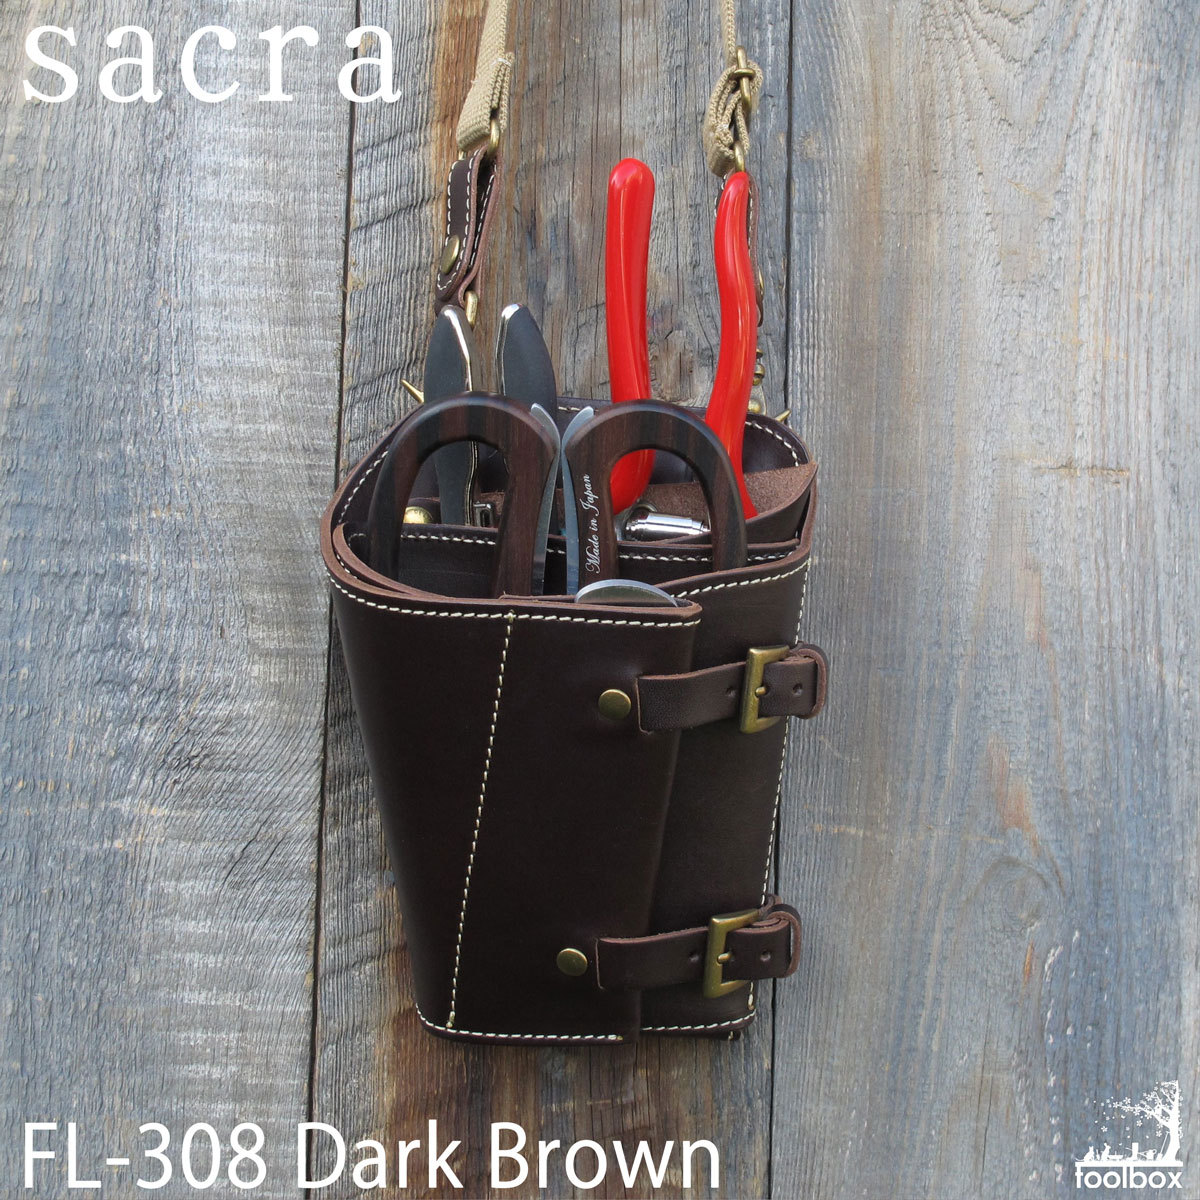 Sacra Sakura florist si The - case [FL-308] flower shop si The - case pruning . case original leather stylish domestic production free shipping gift present present birthday 